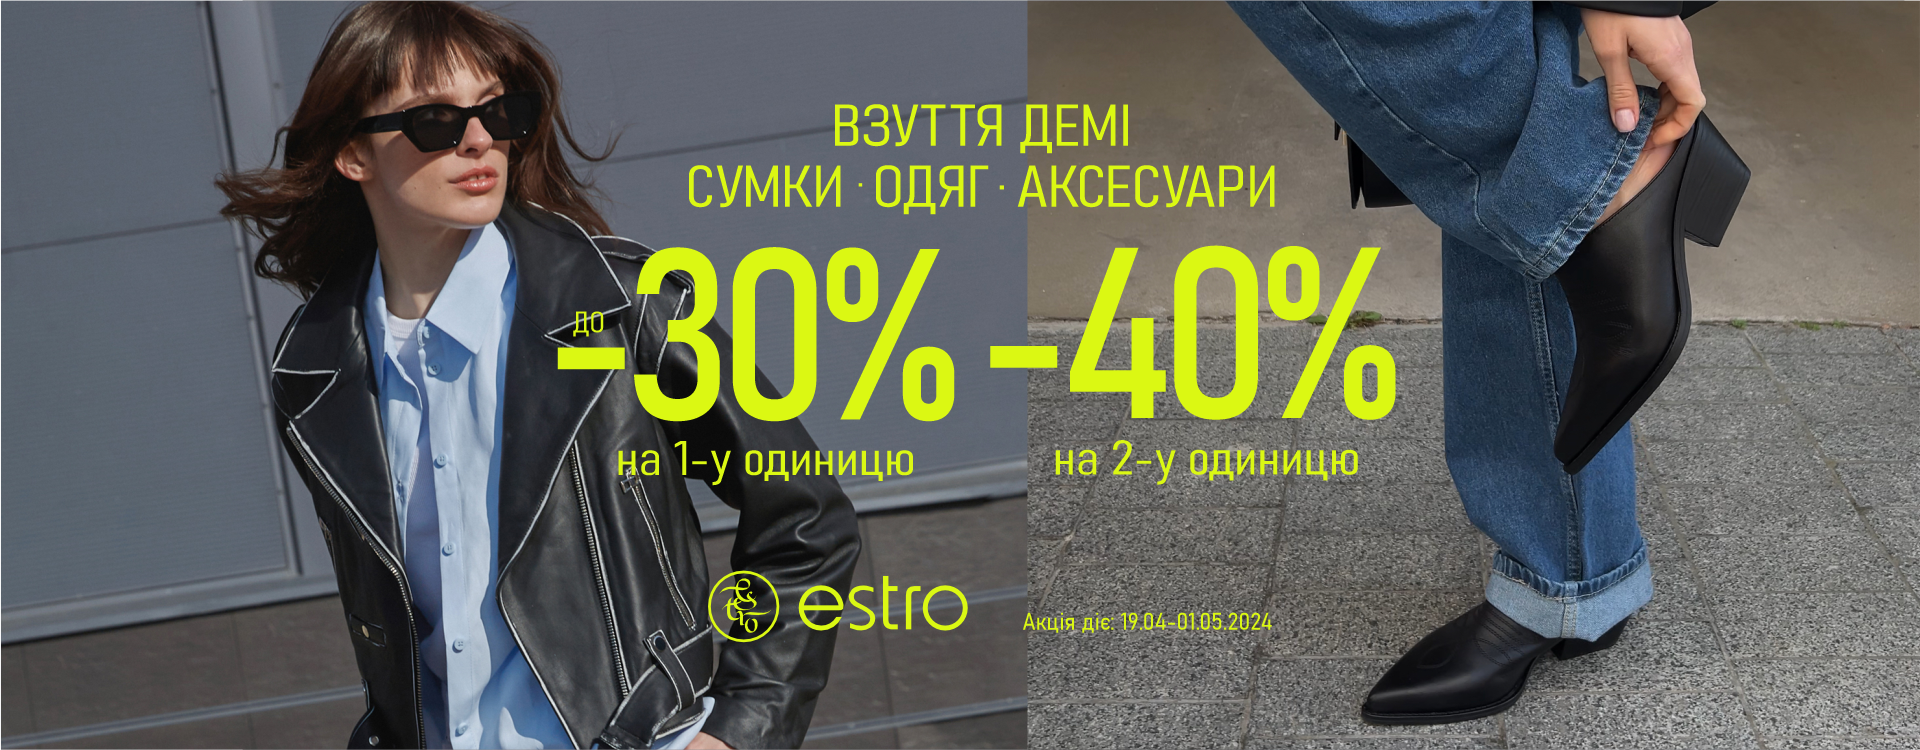 Discount up to -30% on 1 and -40% on 2nd unit